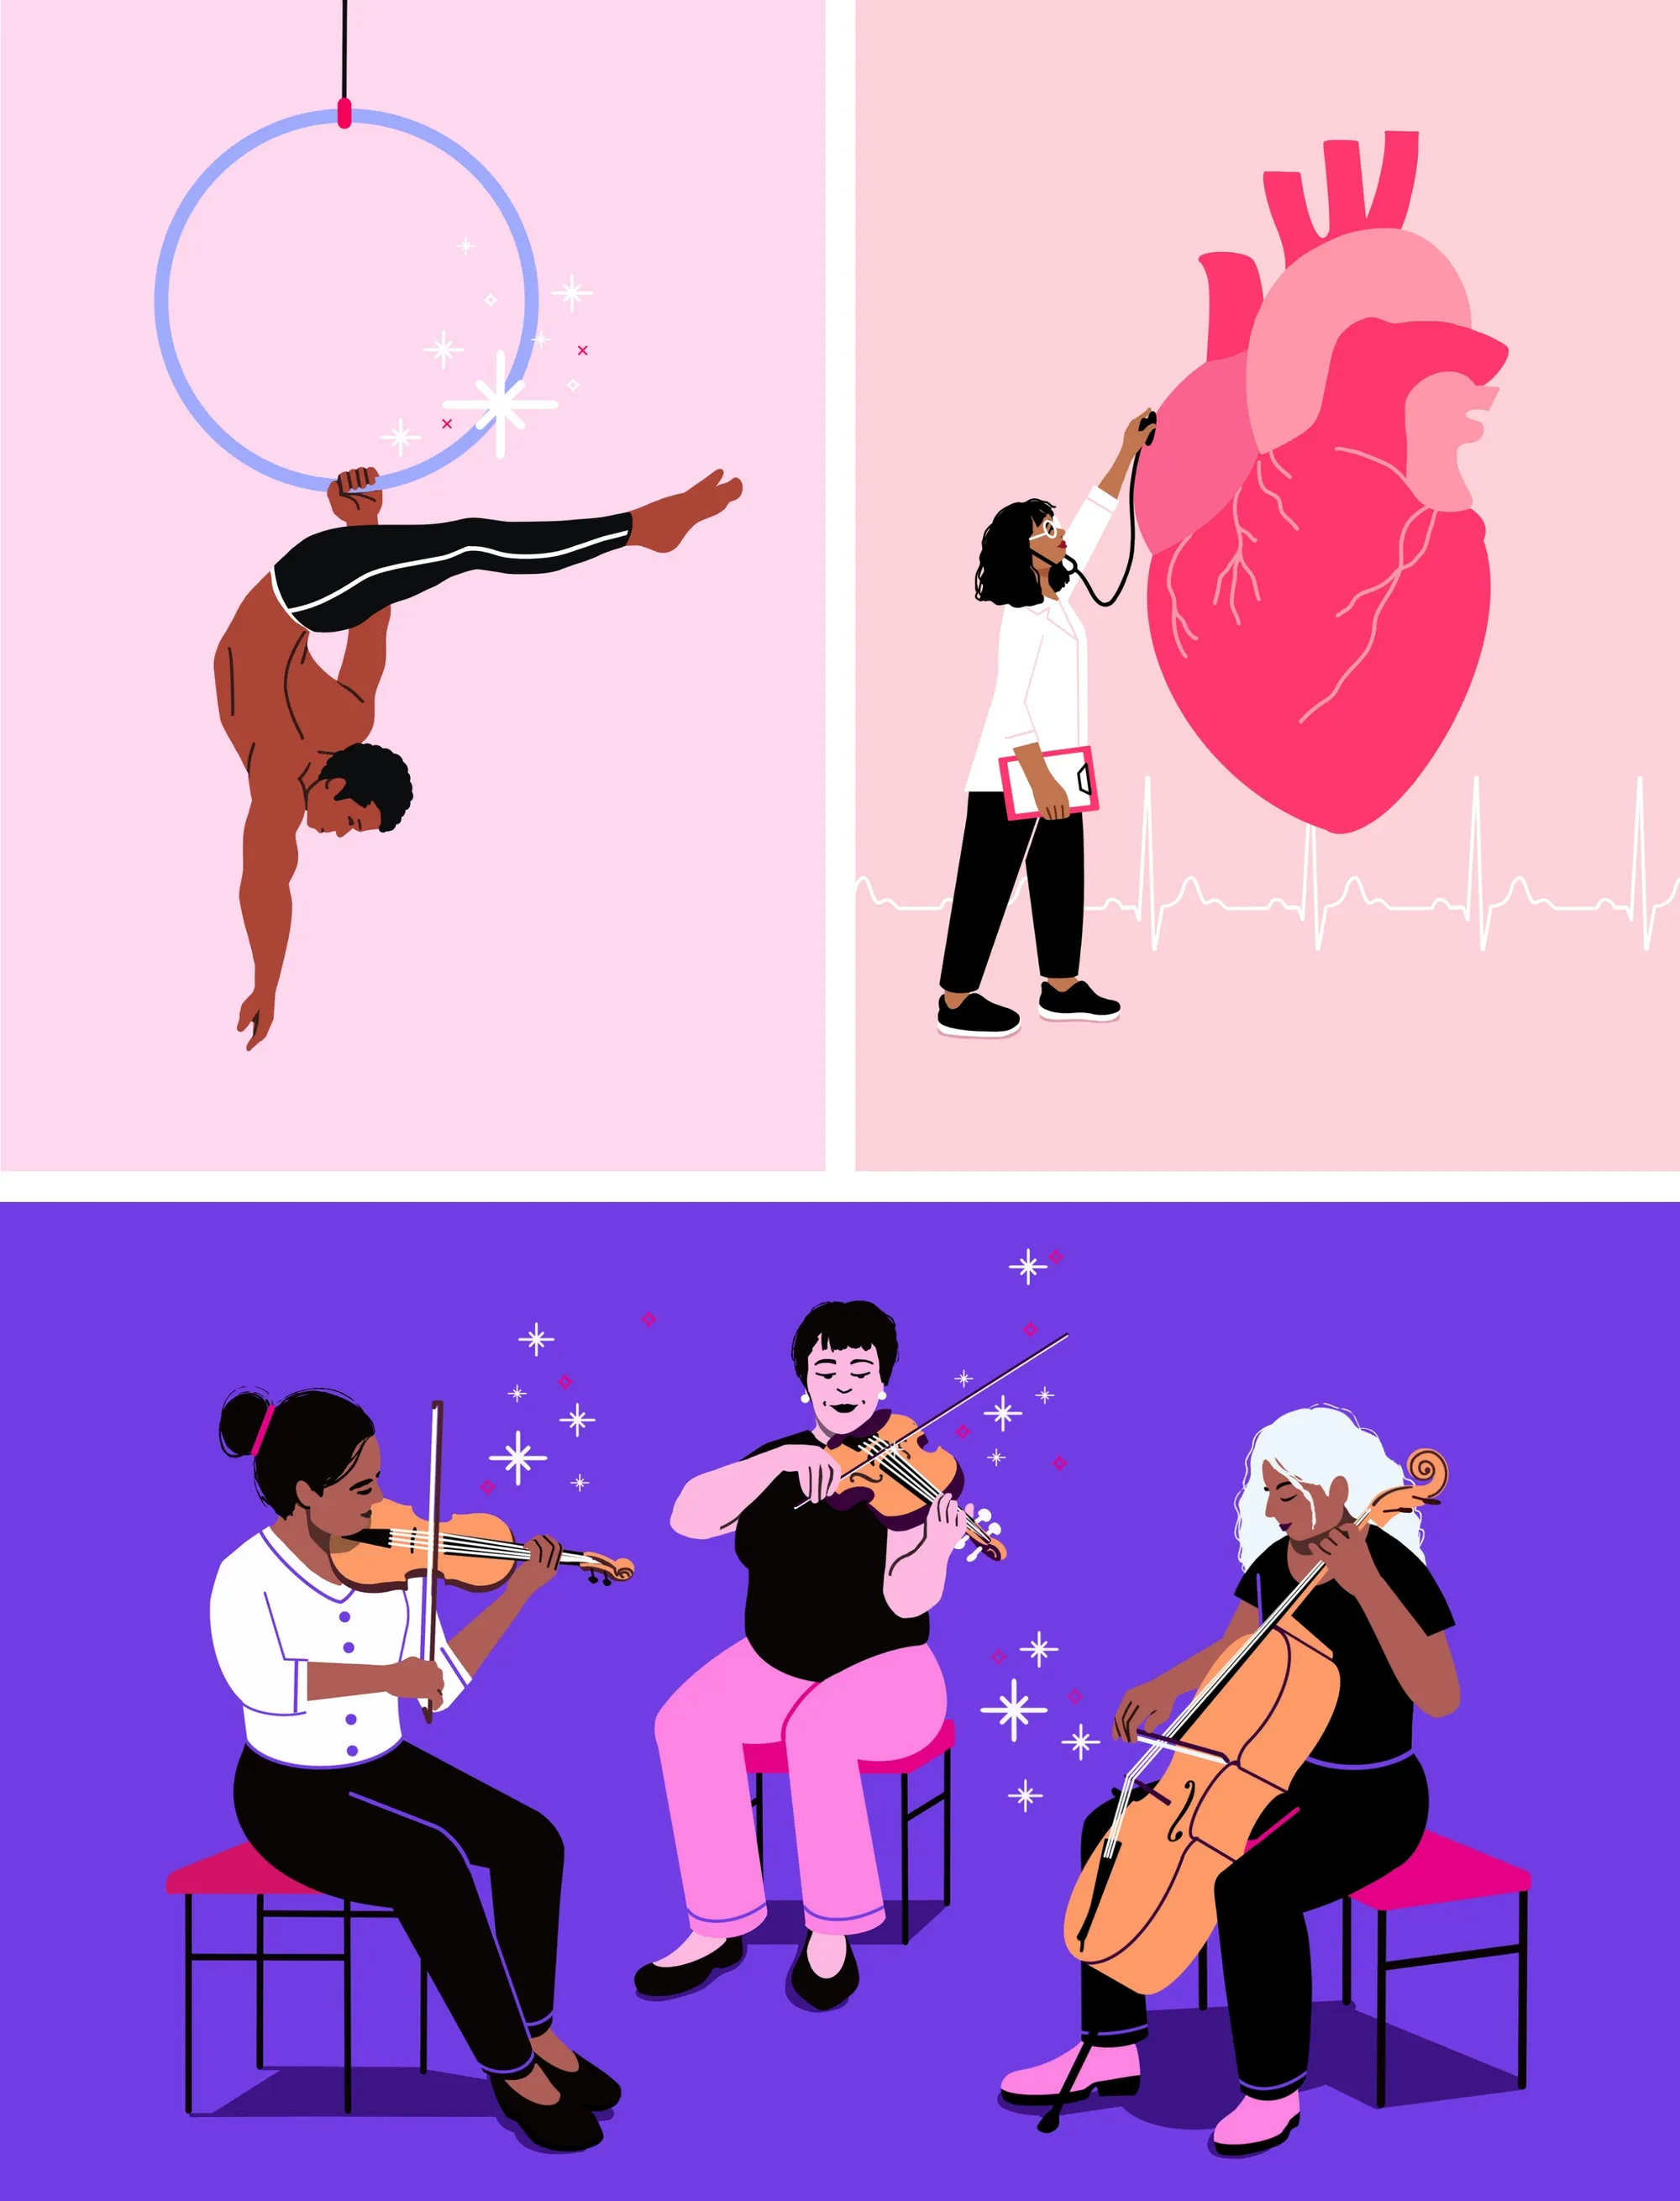 Illustration by Sophie Alp of a man excercising, a woman next to a heart and three women playing string instruments. 